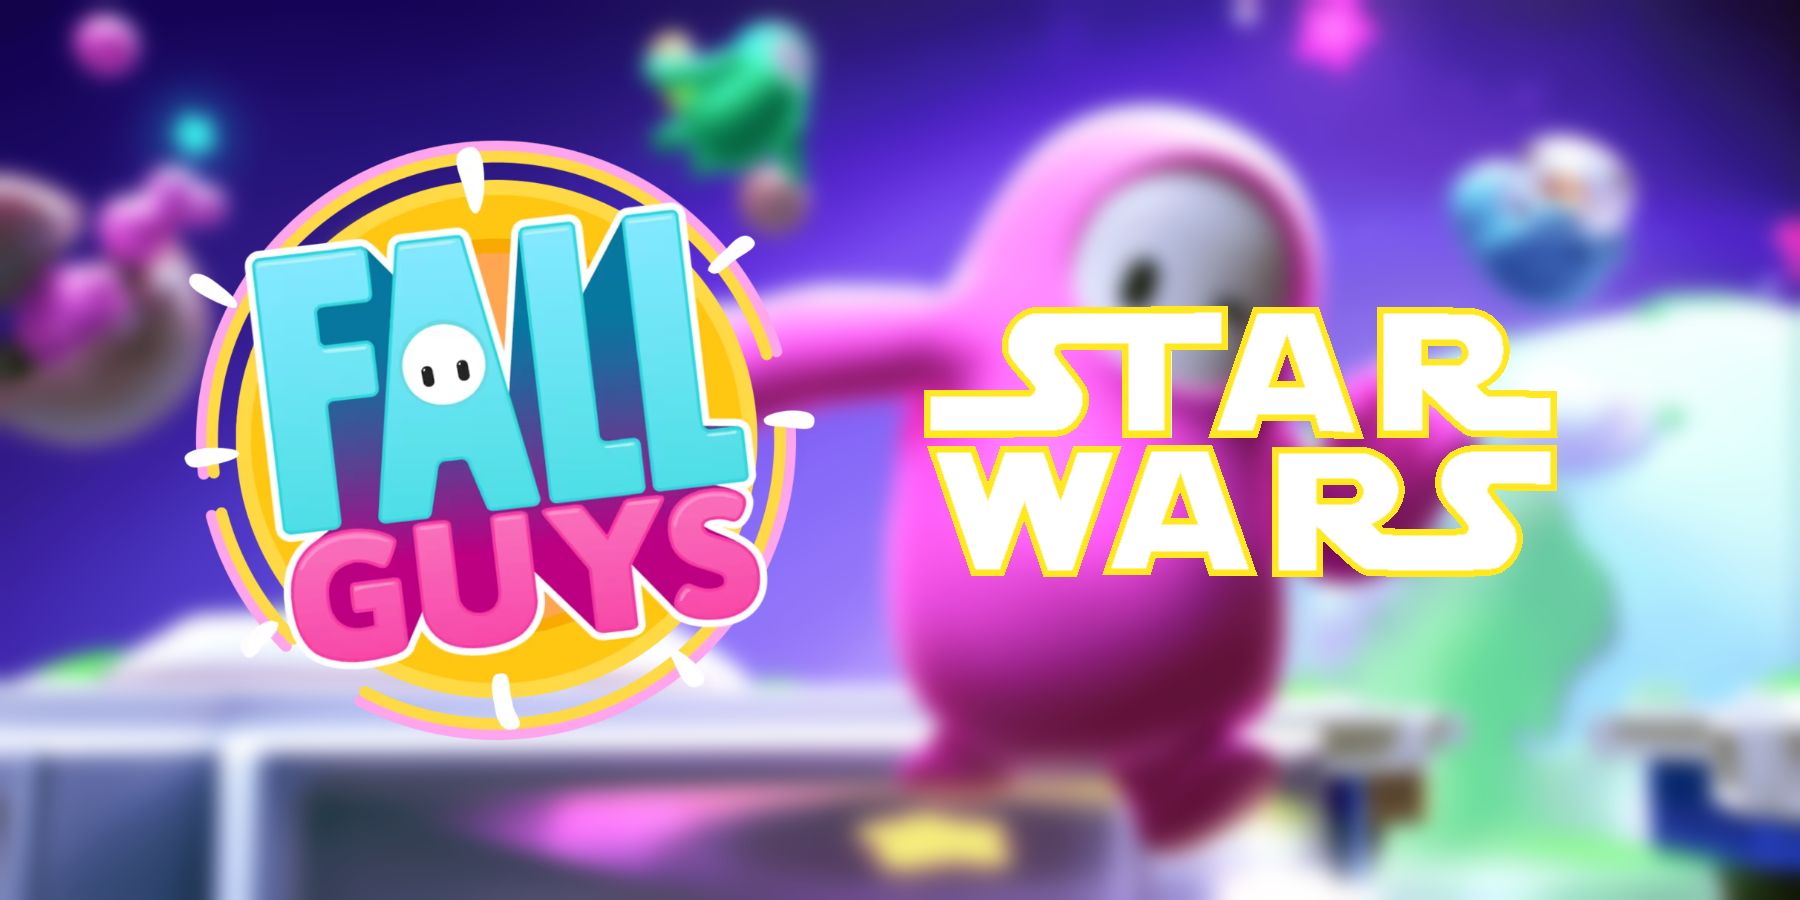 The logos for Fall Guys and Star Wars set against a blurred key visual from Fall Guys